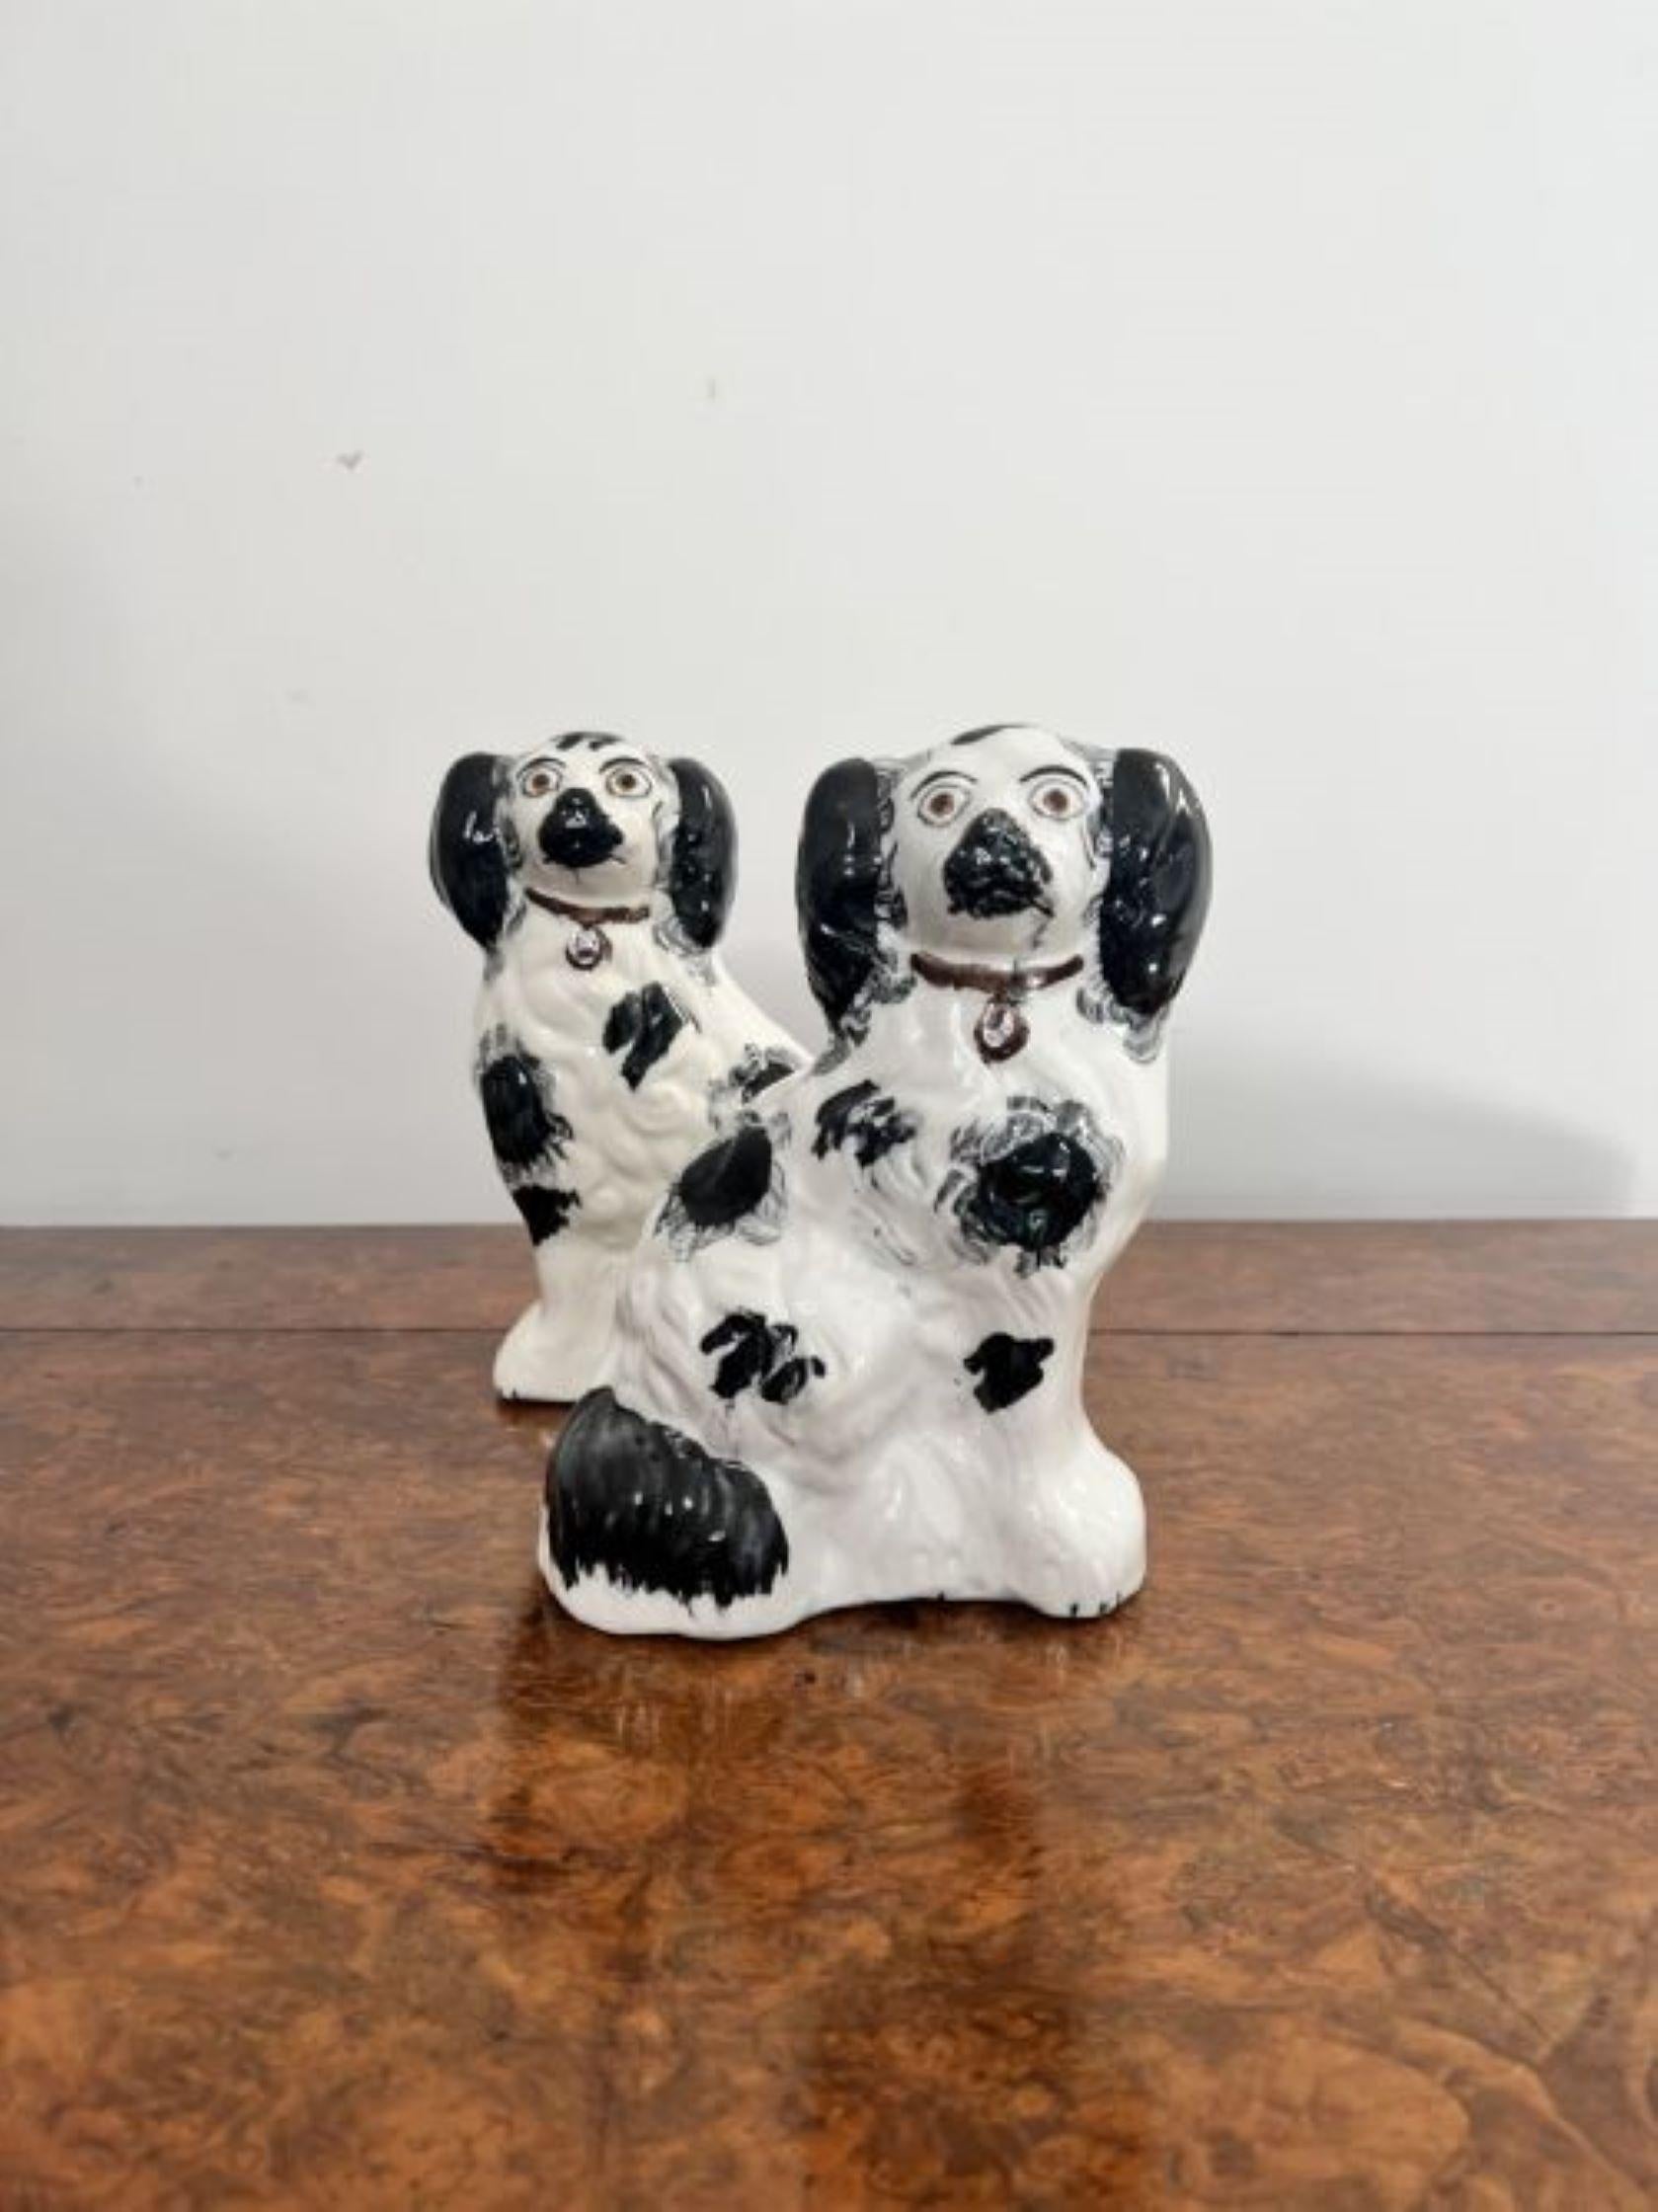 Quality pair of antique Victorian miniature Staffordshire dogs having a quality pair of antique Victorian Staffordshire dogs with matching black and white coats with brown collars. 